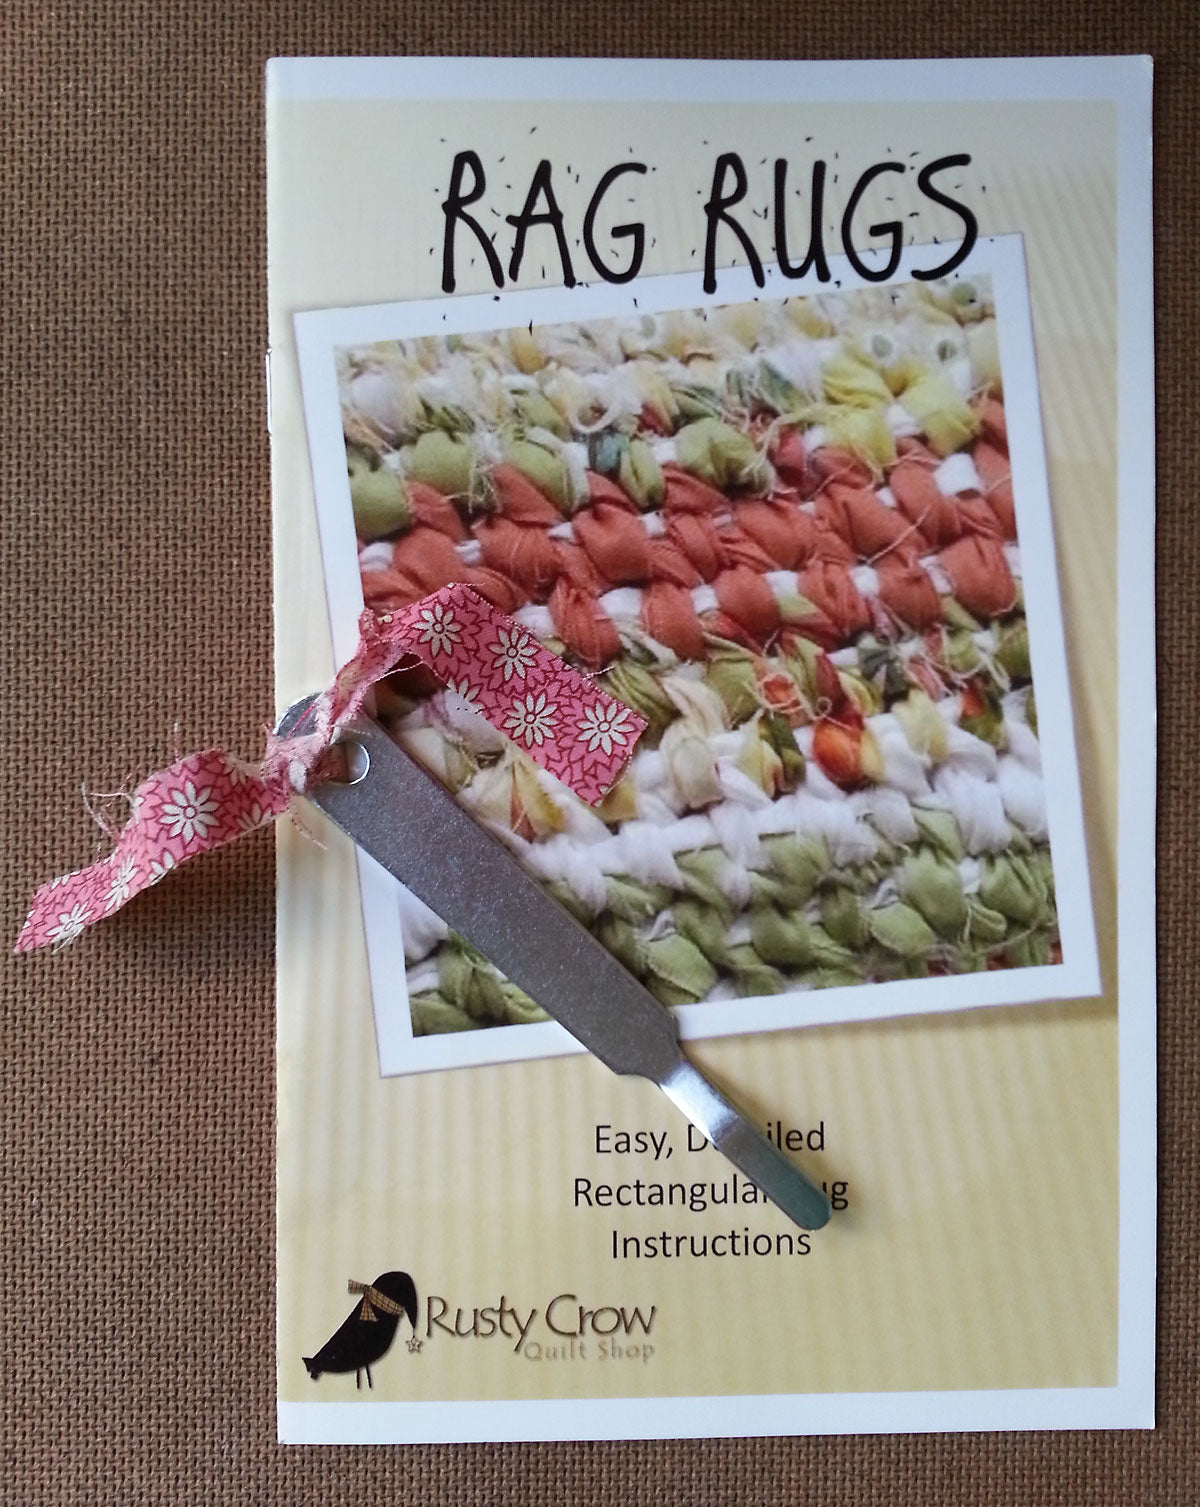 Rag Rugs Rugmaking Booklet with Tool by Shawn York for the Rusty Crow Quilt Shop